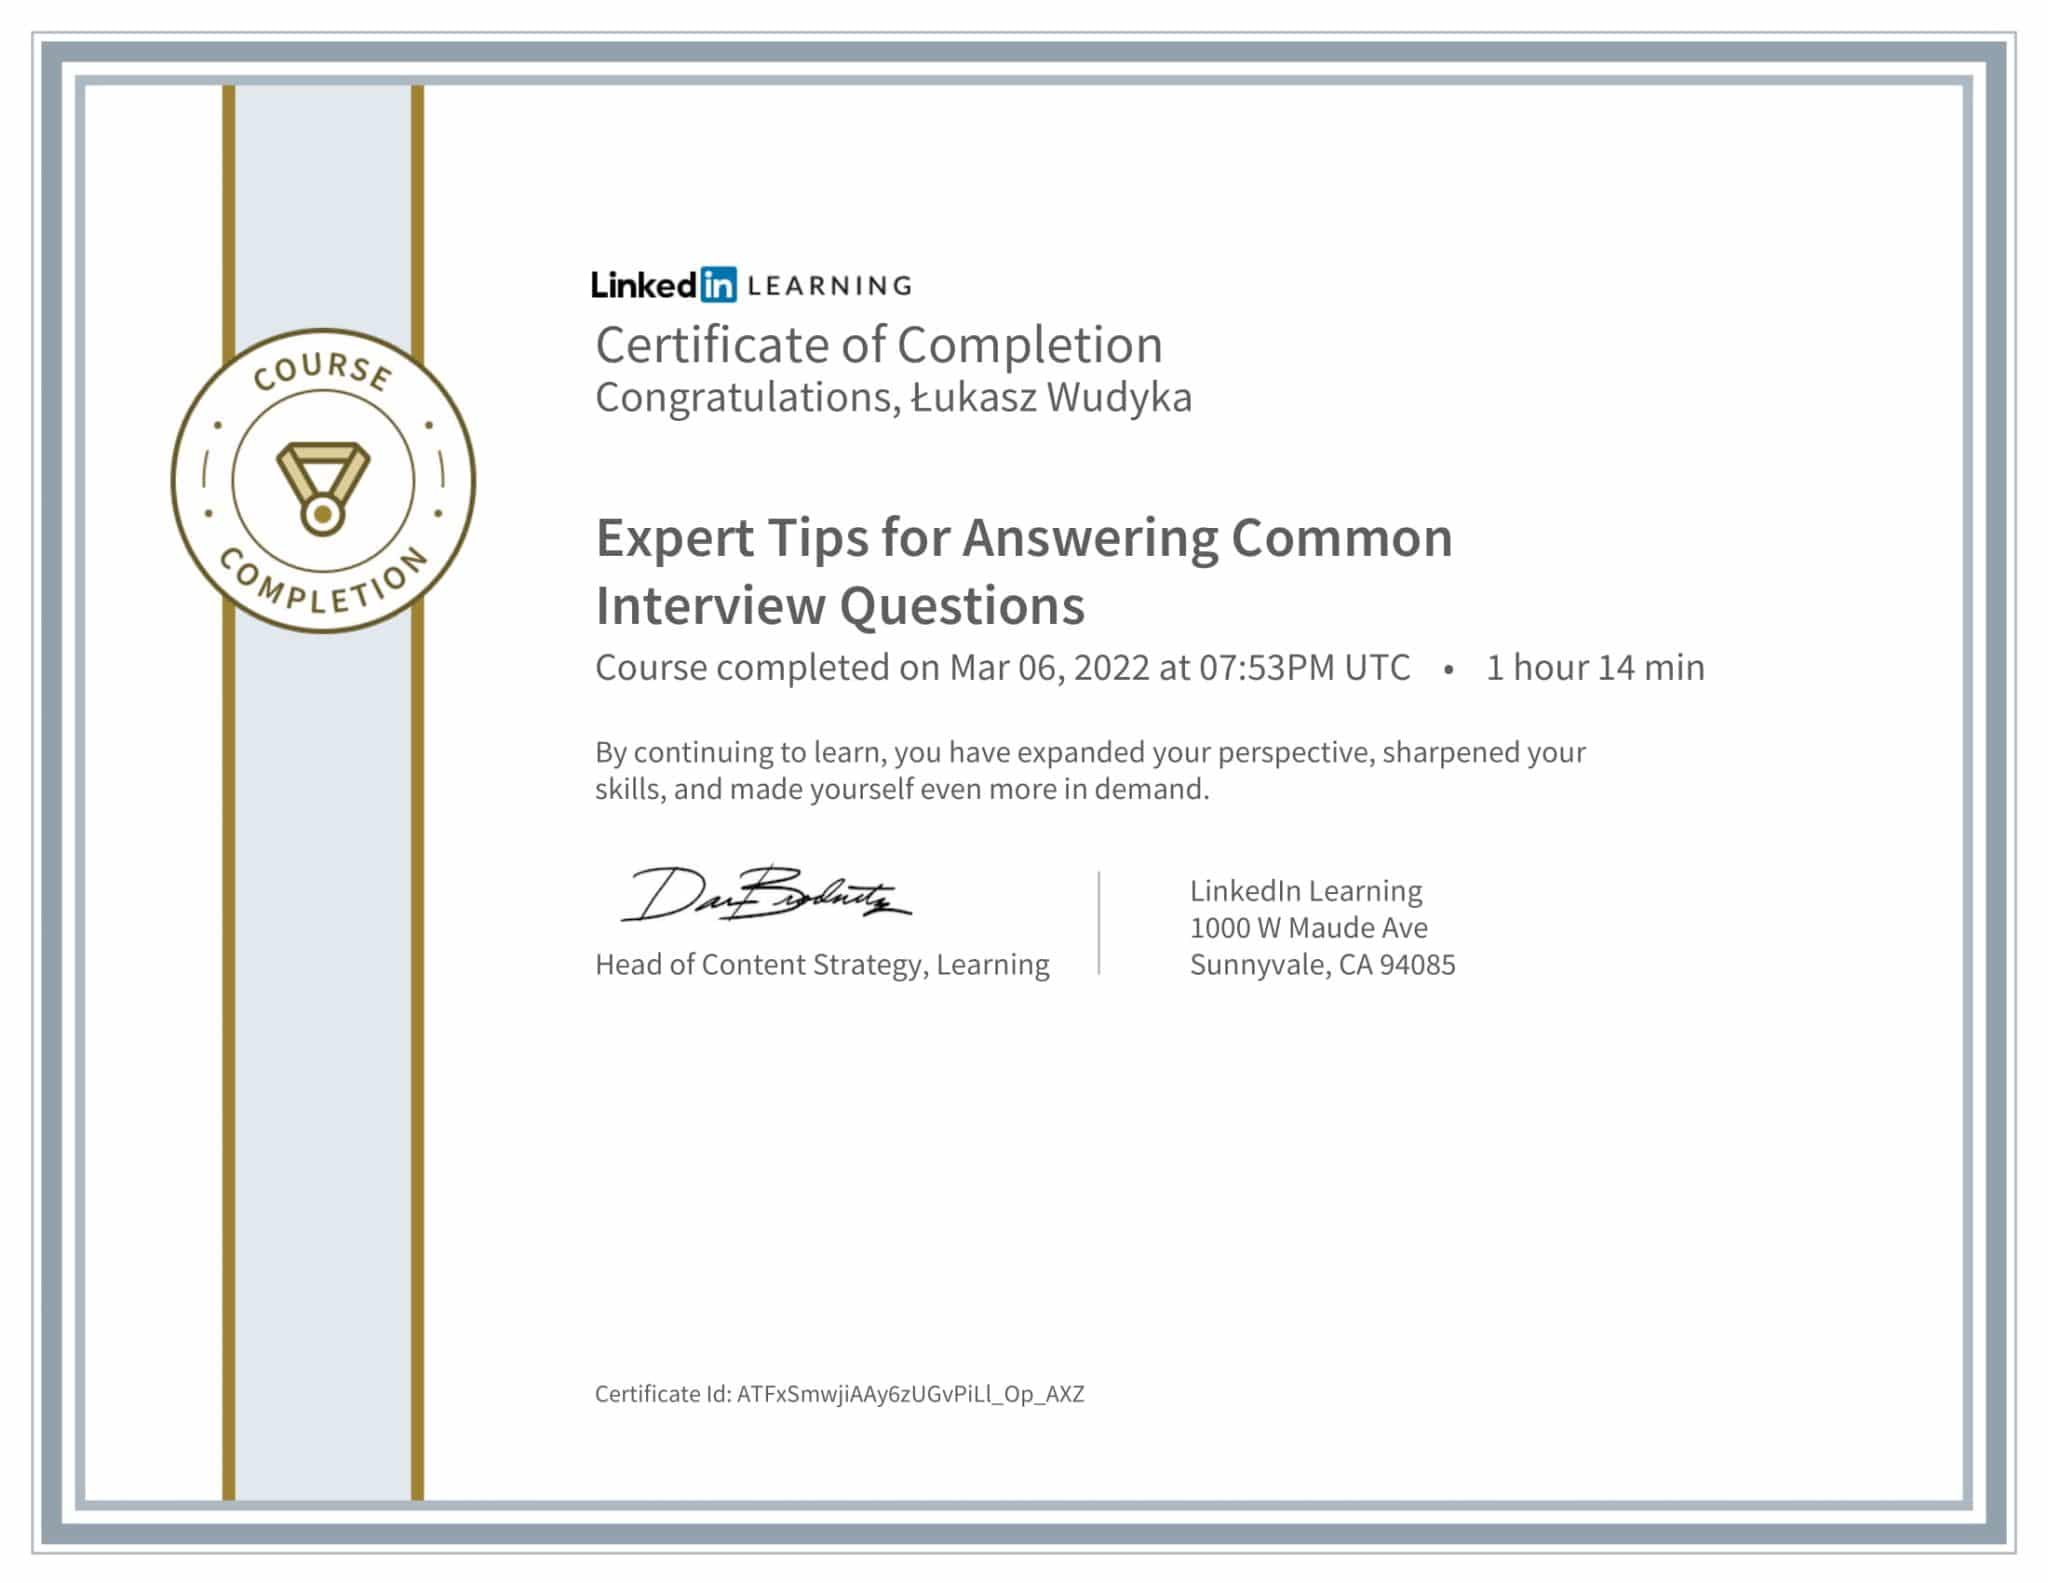 CertificateOfCompletion_Expert Tips for Answering Common Interview Questions-1